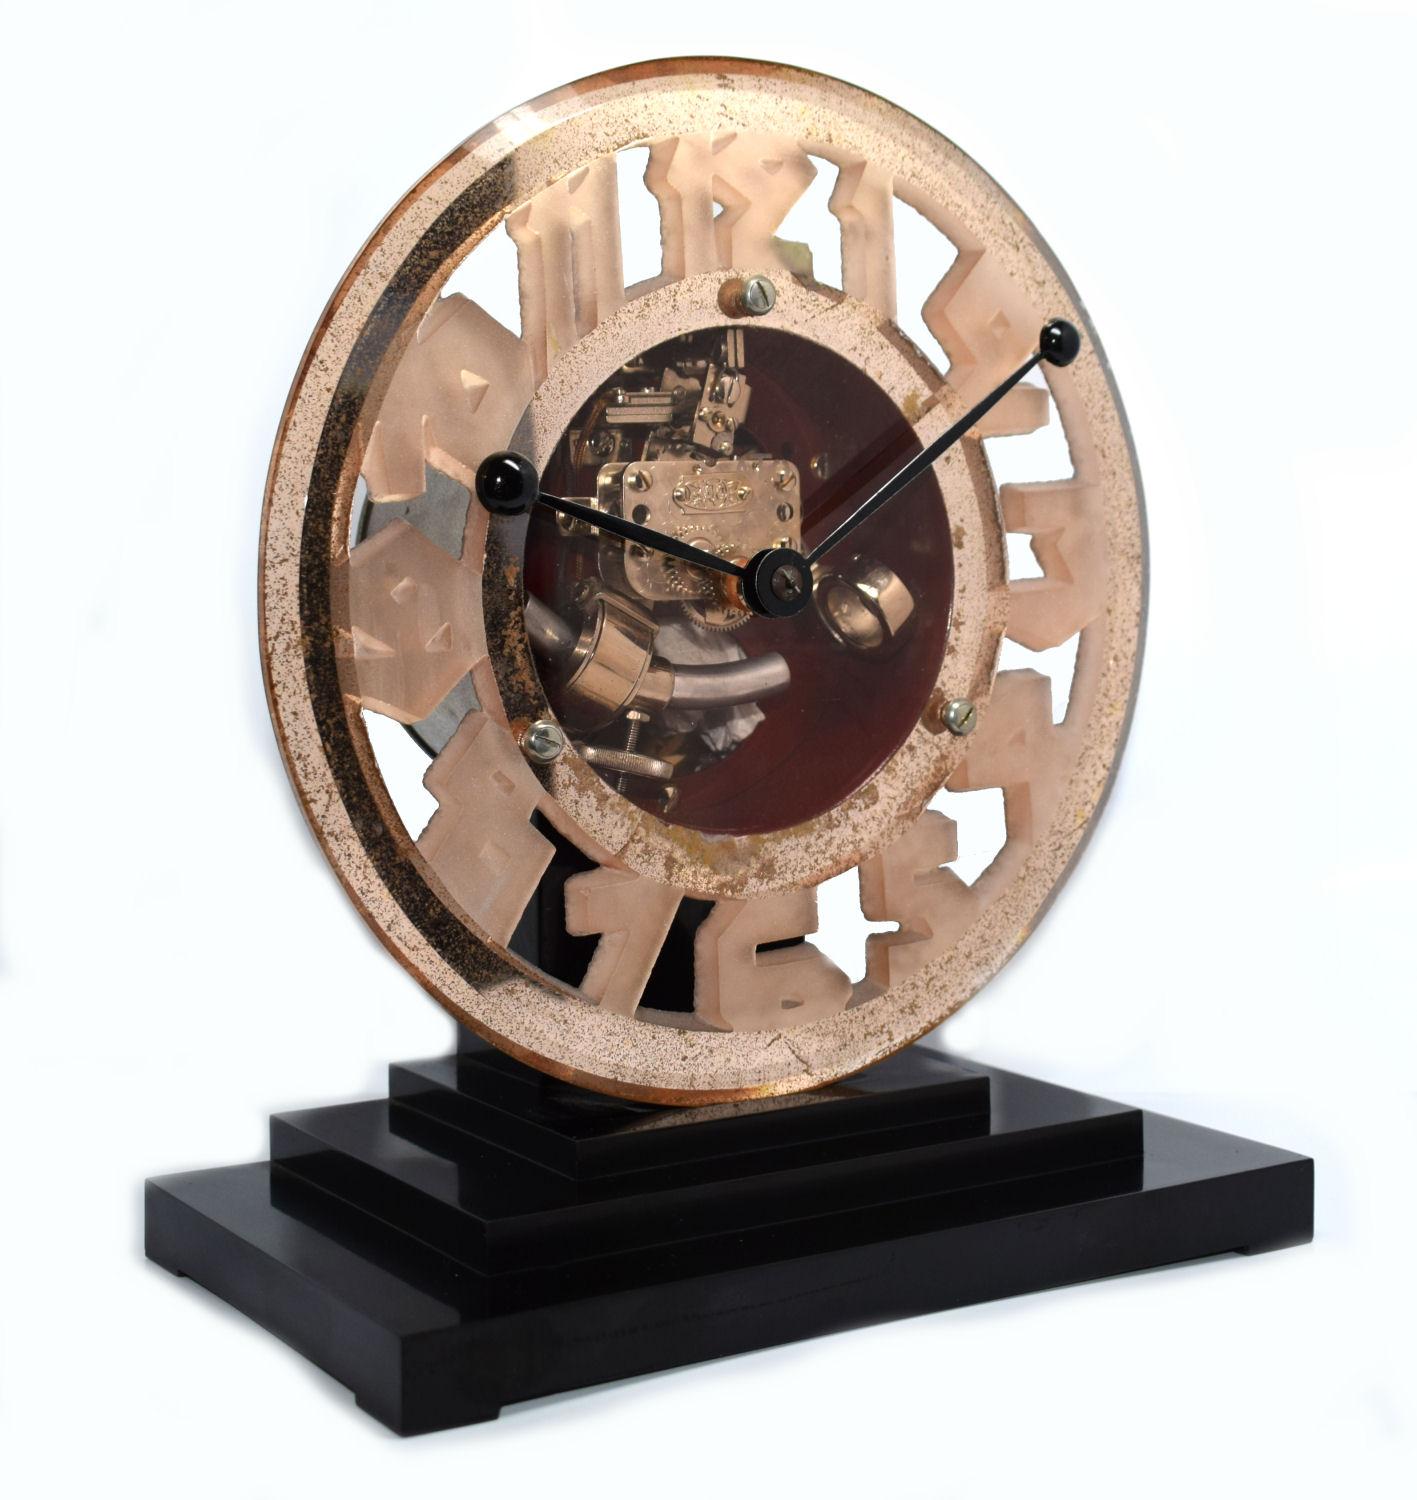 One of the more rare Art Deco clocks is this wonderfully stylish and totally authentic 1930s Art Deco clock by ATO the French clock makers. This clock has a mixtures of materials, mainly Bakelite and pink mirror glass. Very iconic looking clock that